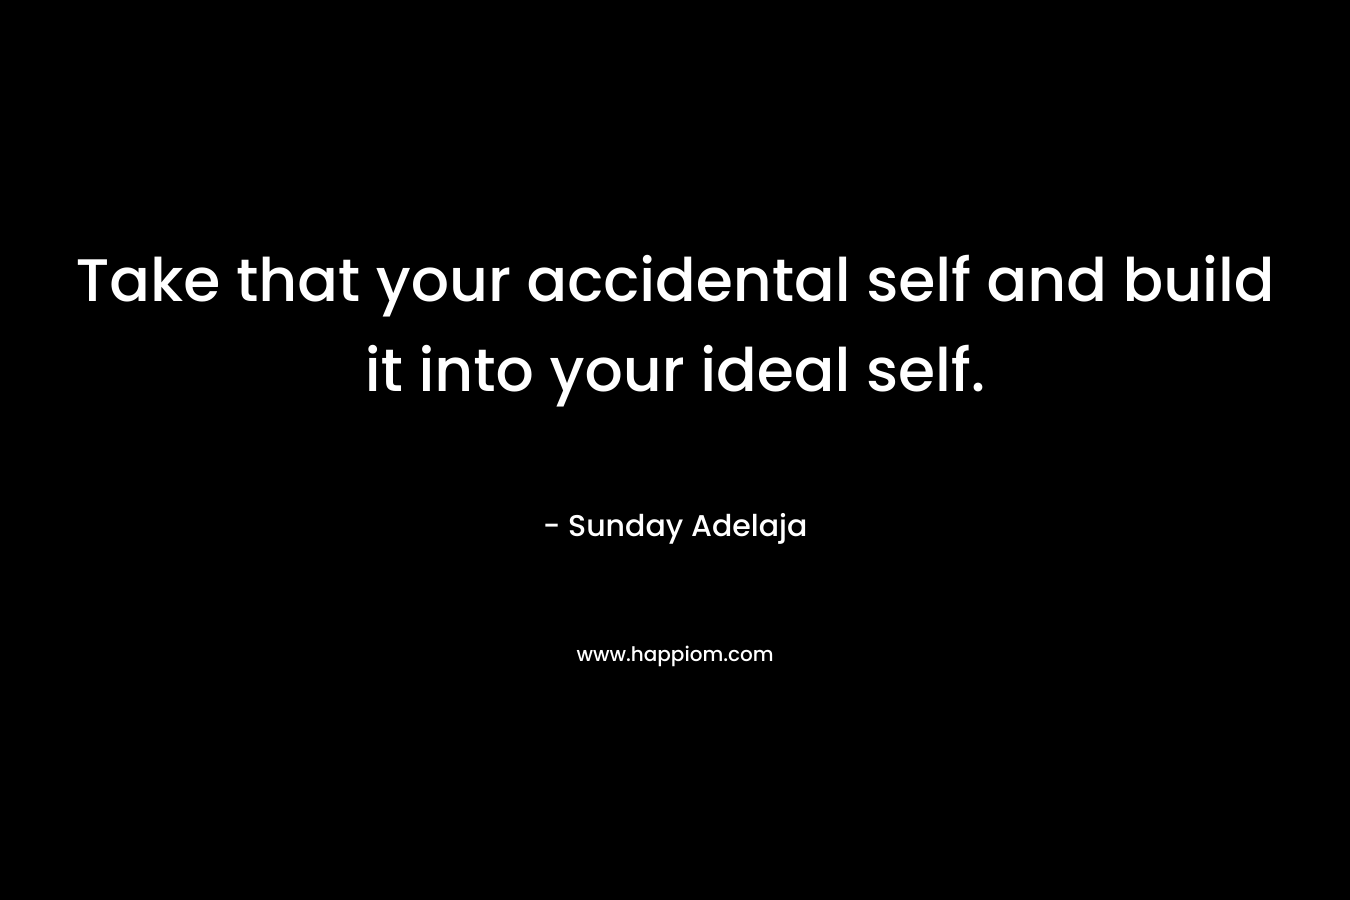 Take that your accidental self and build it into your ideal self.